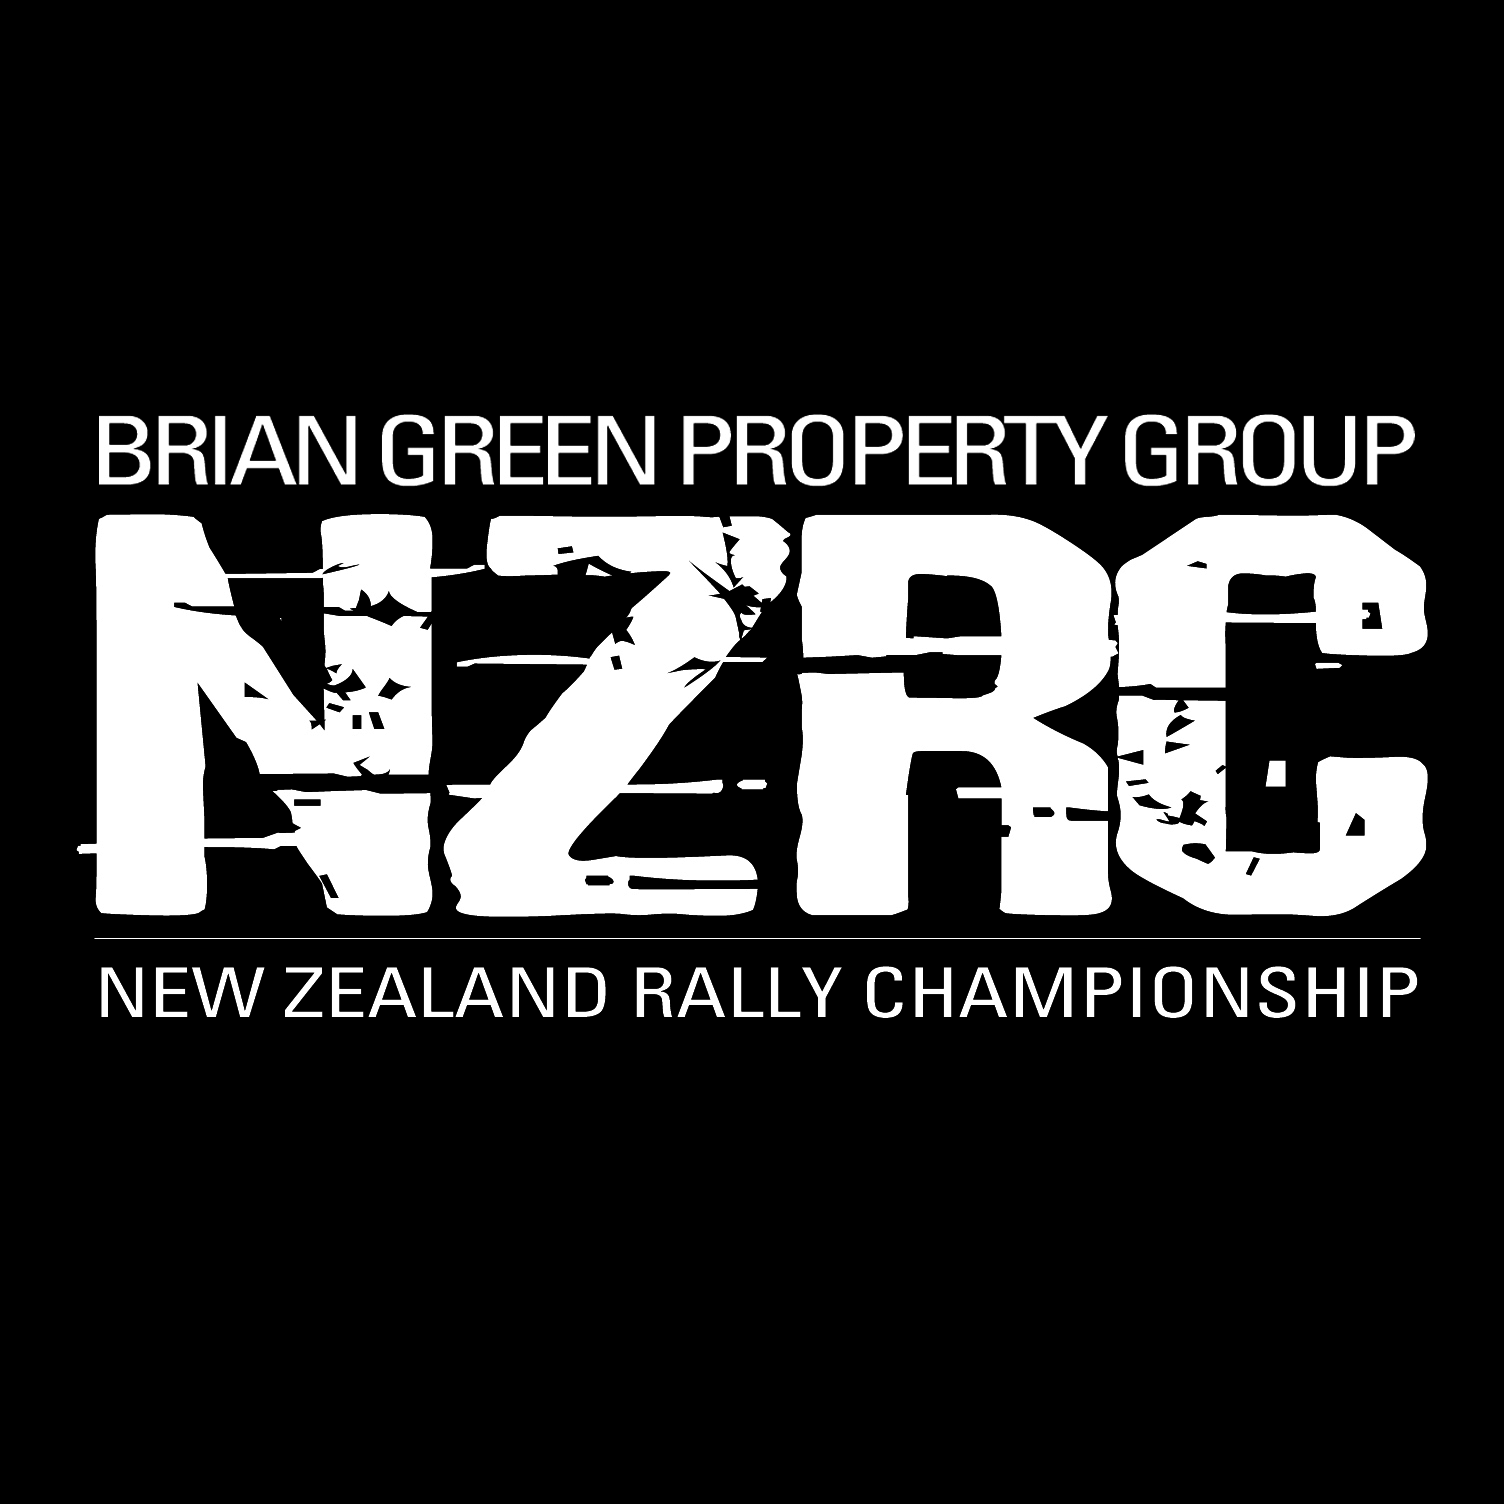 2019 NZRC draft calendar released | :: Brian Green Property Group New Zealand Rally Championship ::